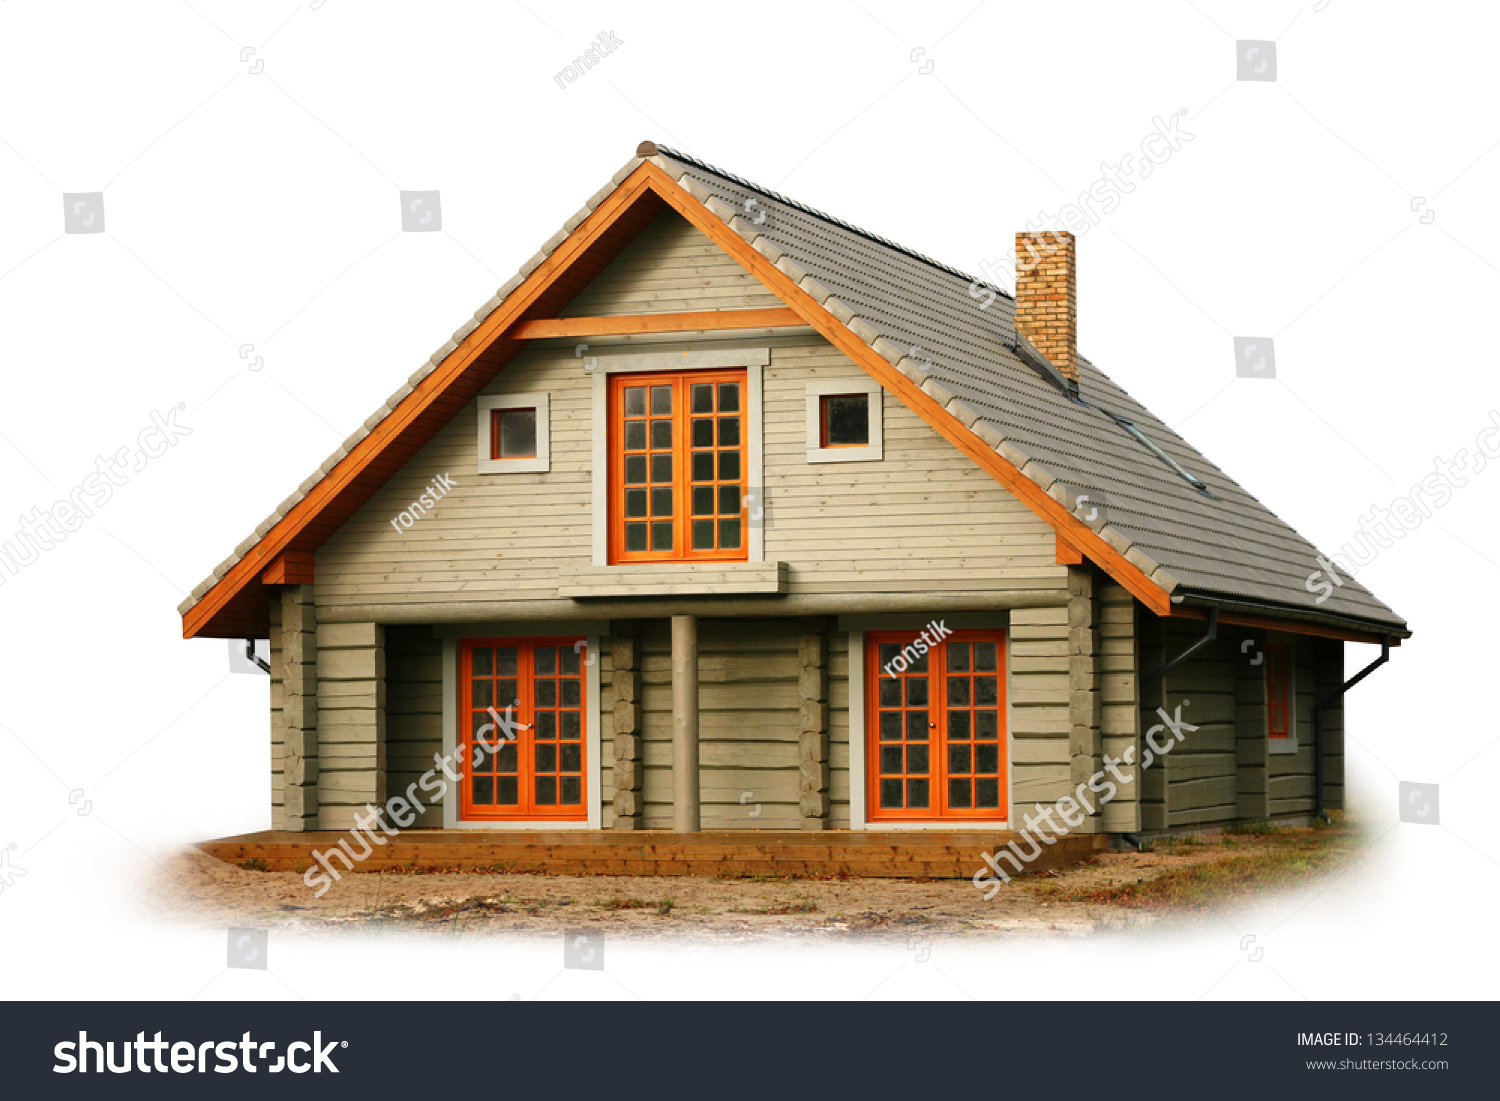 wood house clipart - photo #44